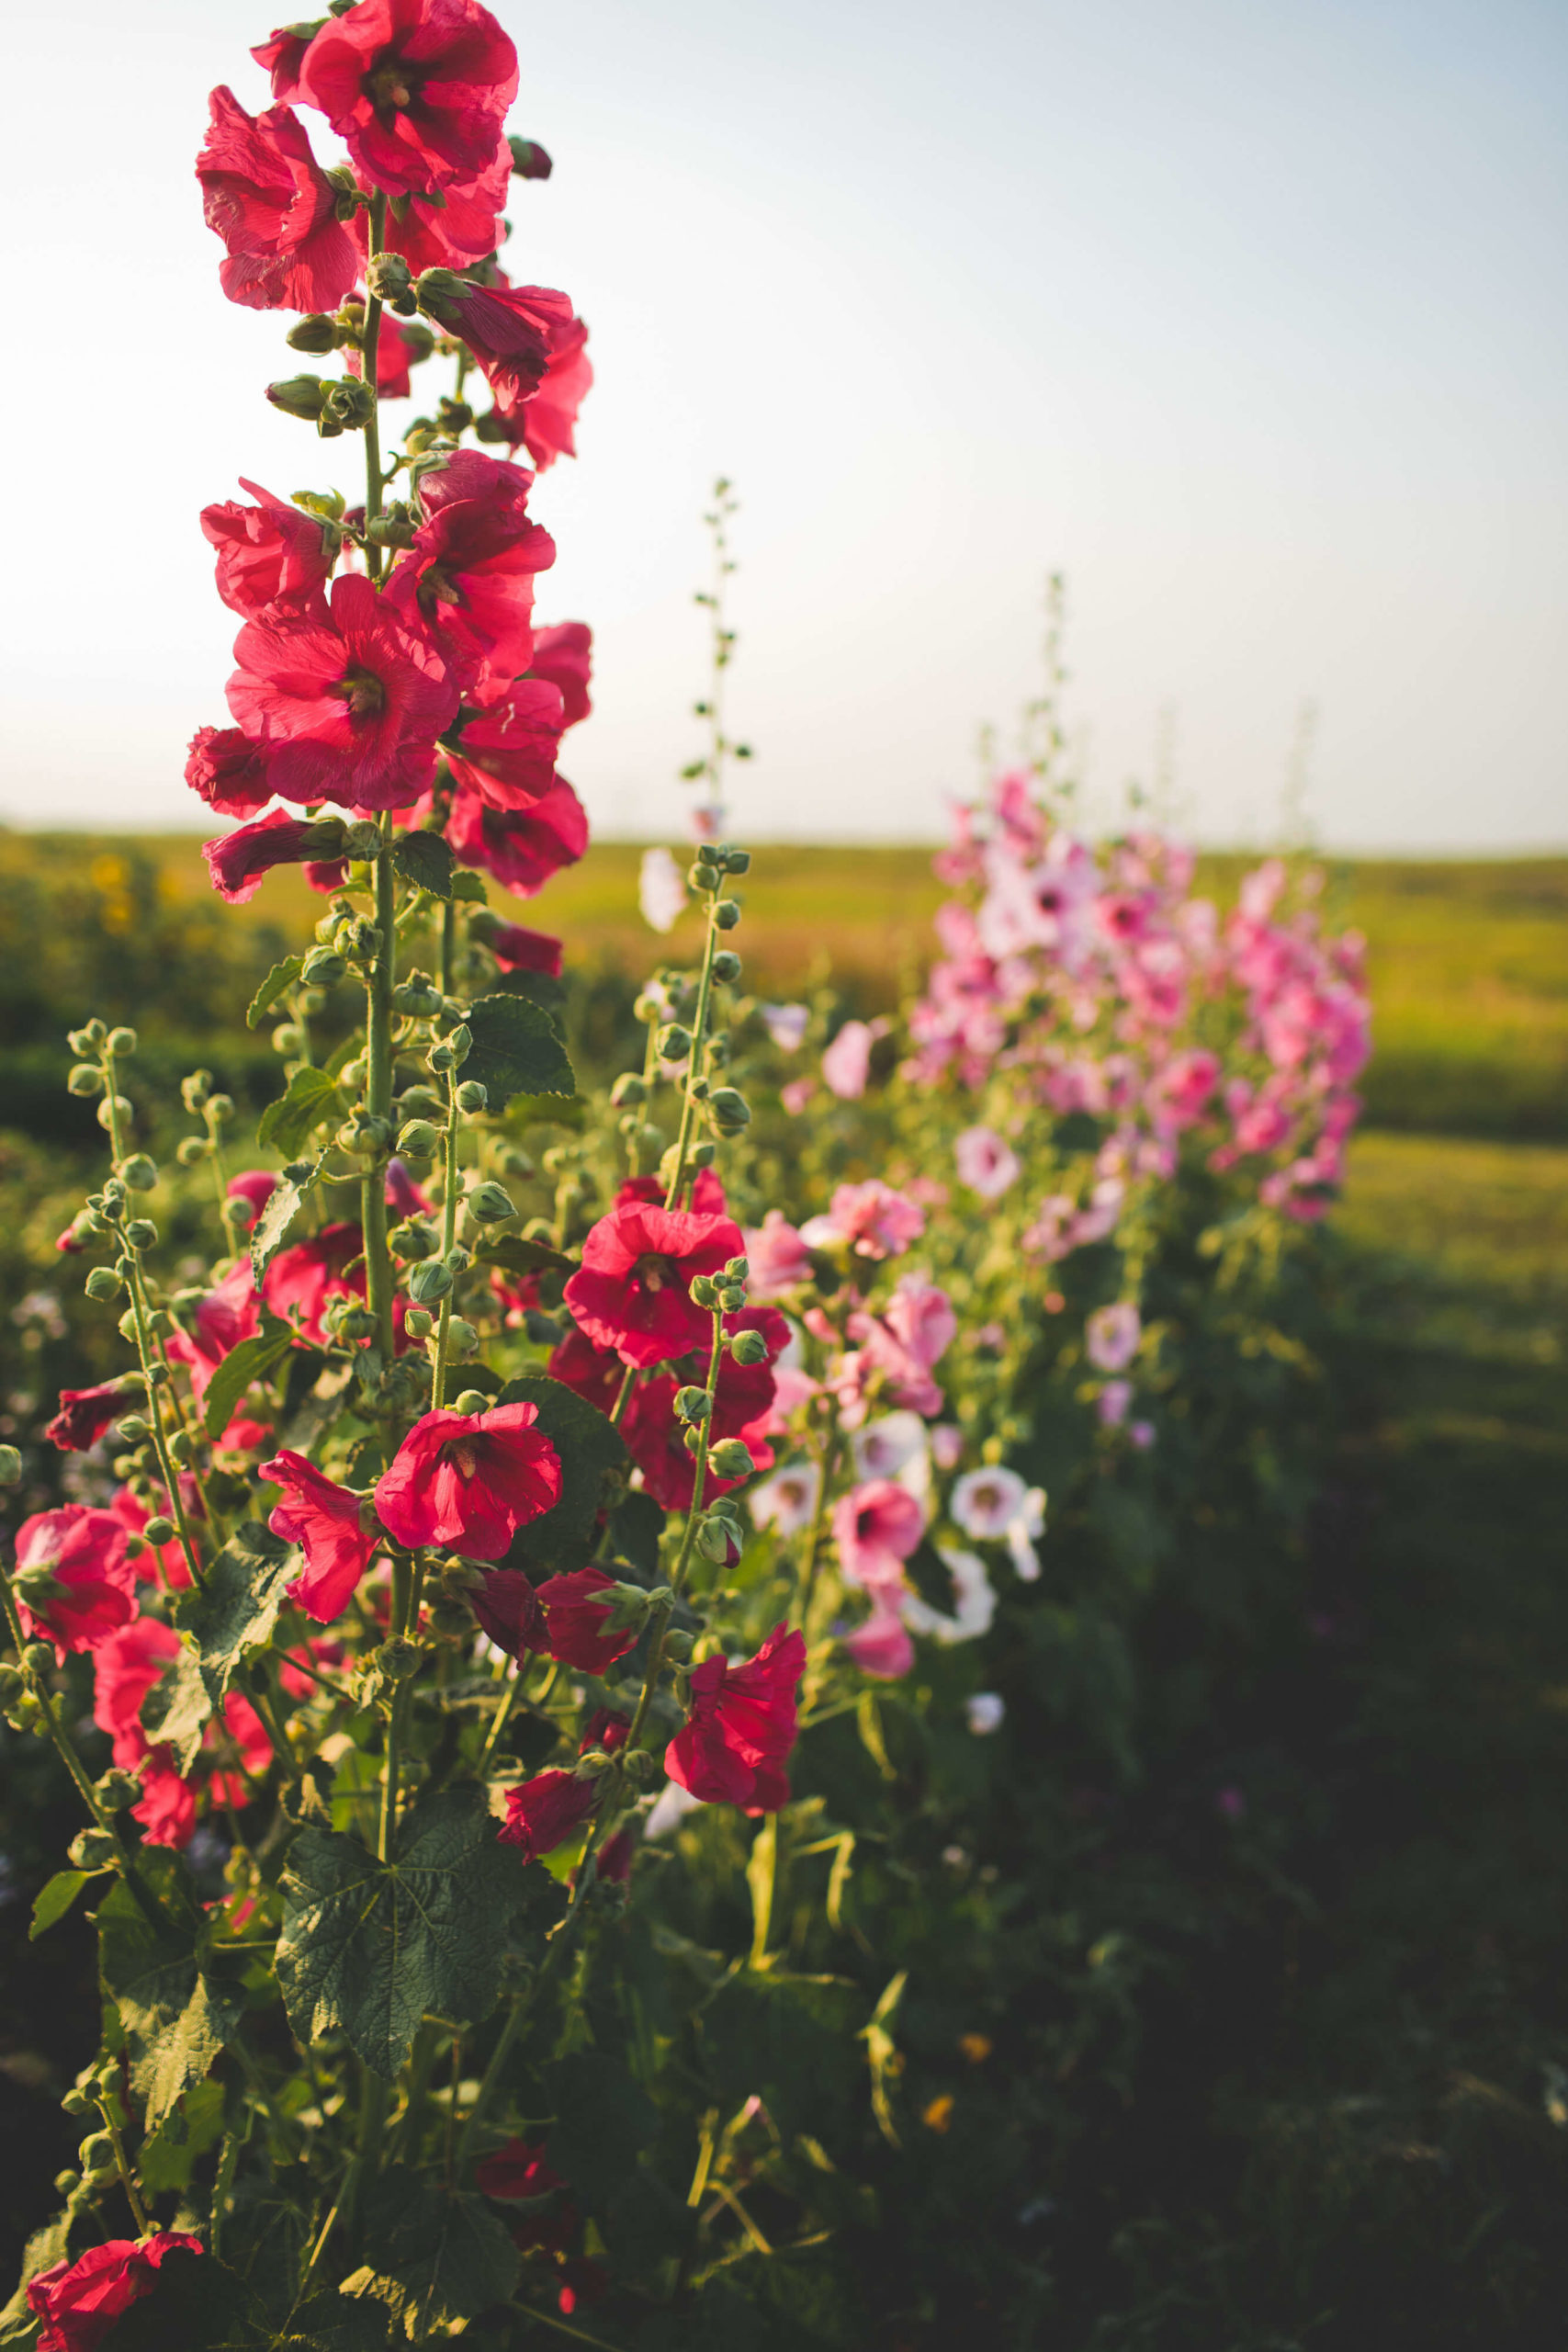 Red and pink flowers in a field.